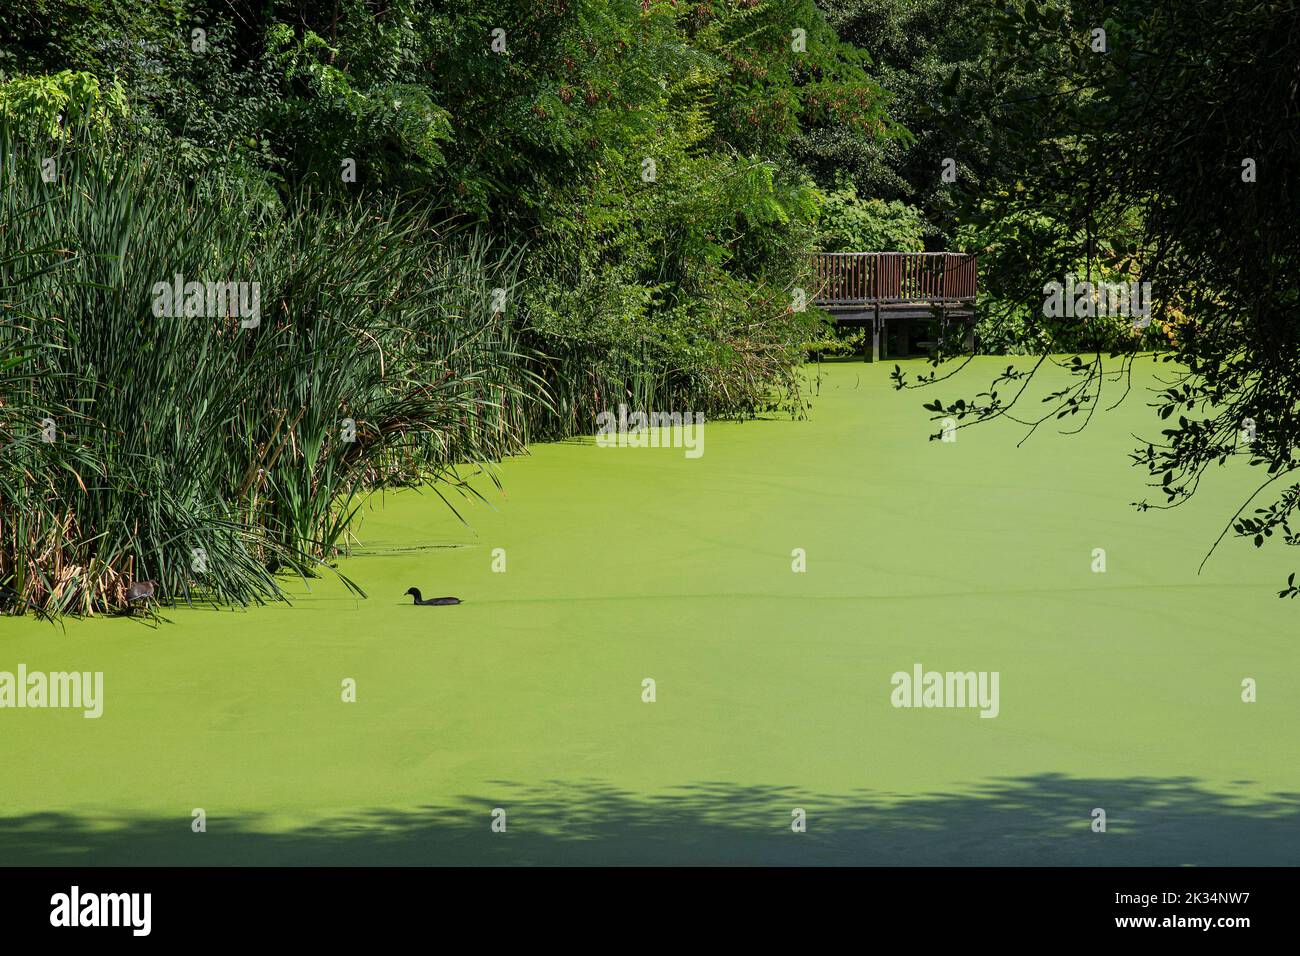 pond covered with green duckweed on the surface, with trees around Stock Photo